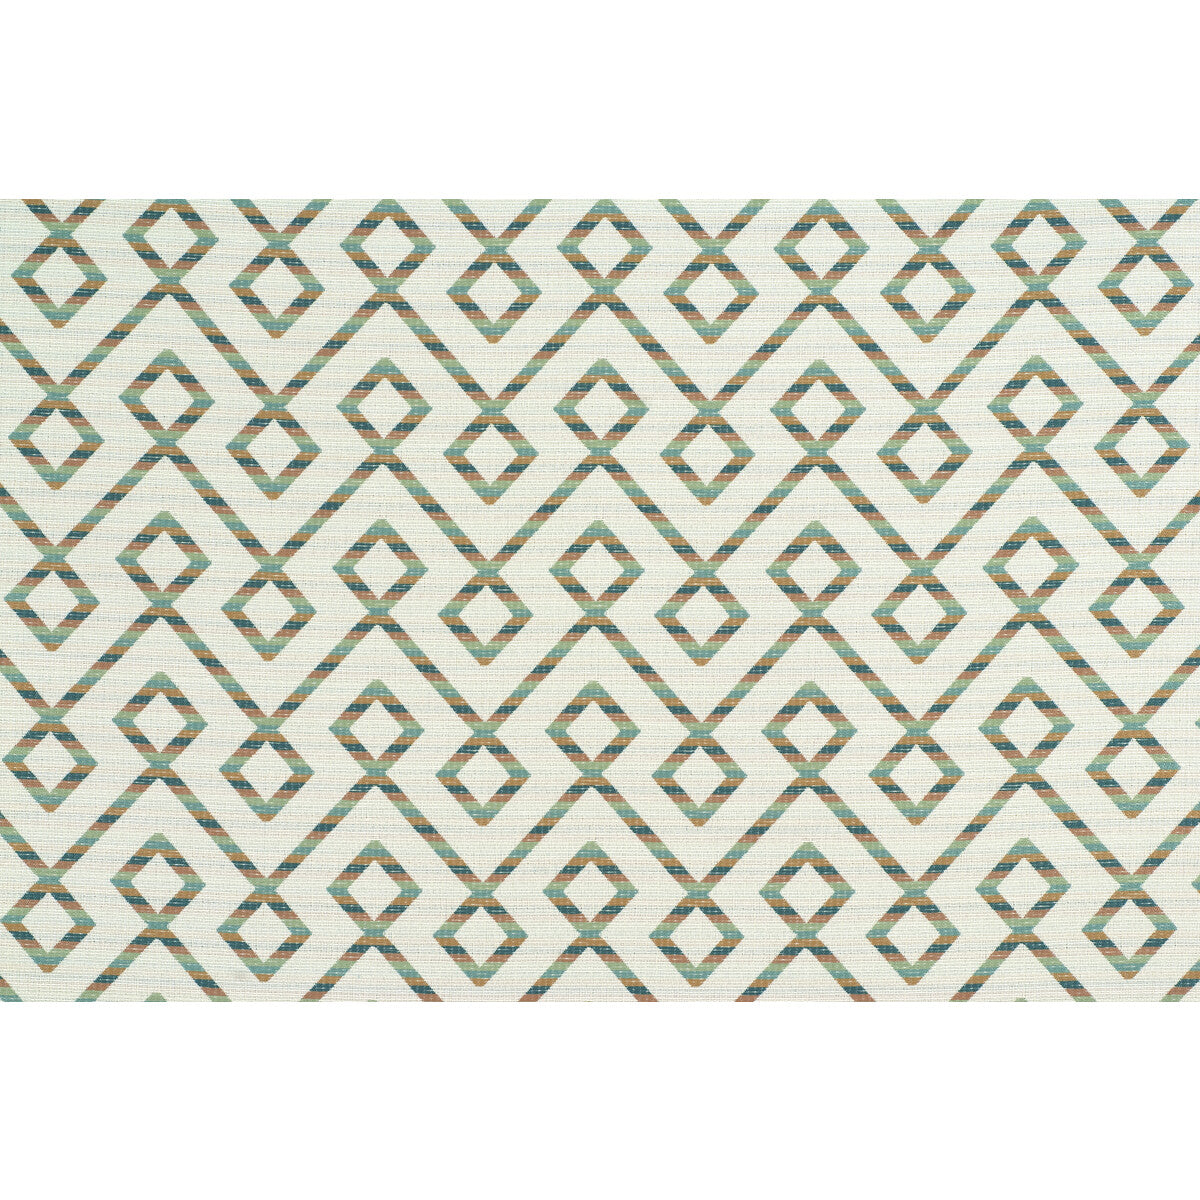 Kravet Design fabric in 34708-324 color - pattern 34708.324.0 - by Kravet Design in the Crypton Home collection